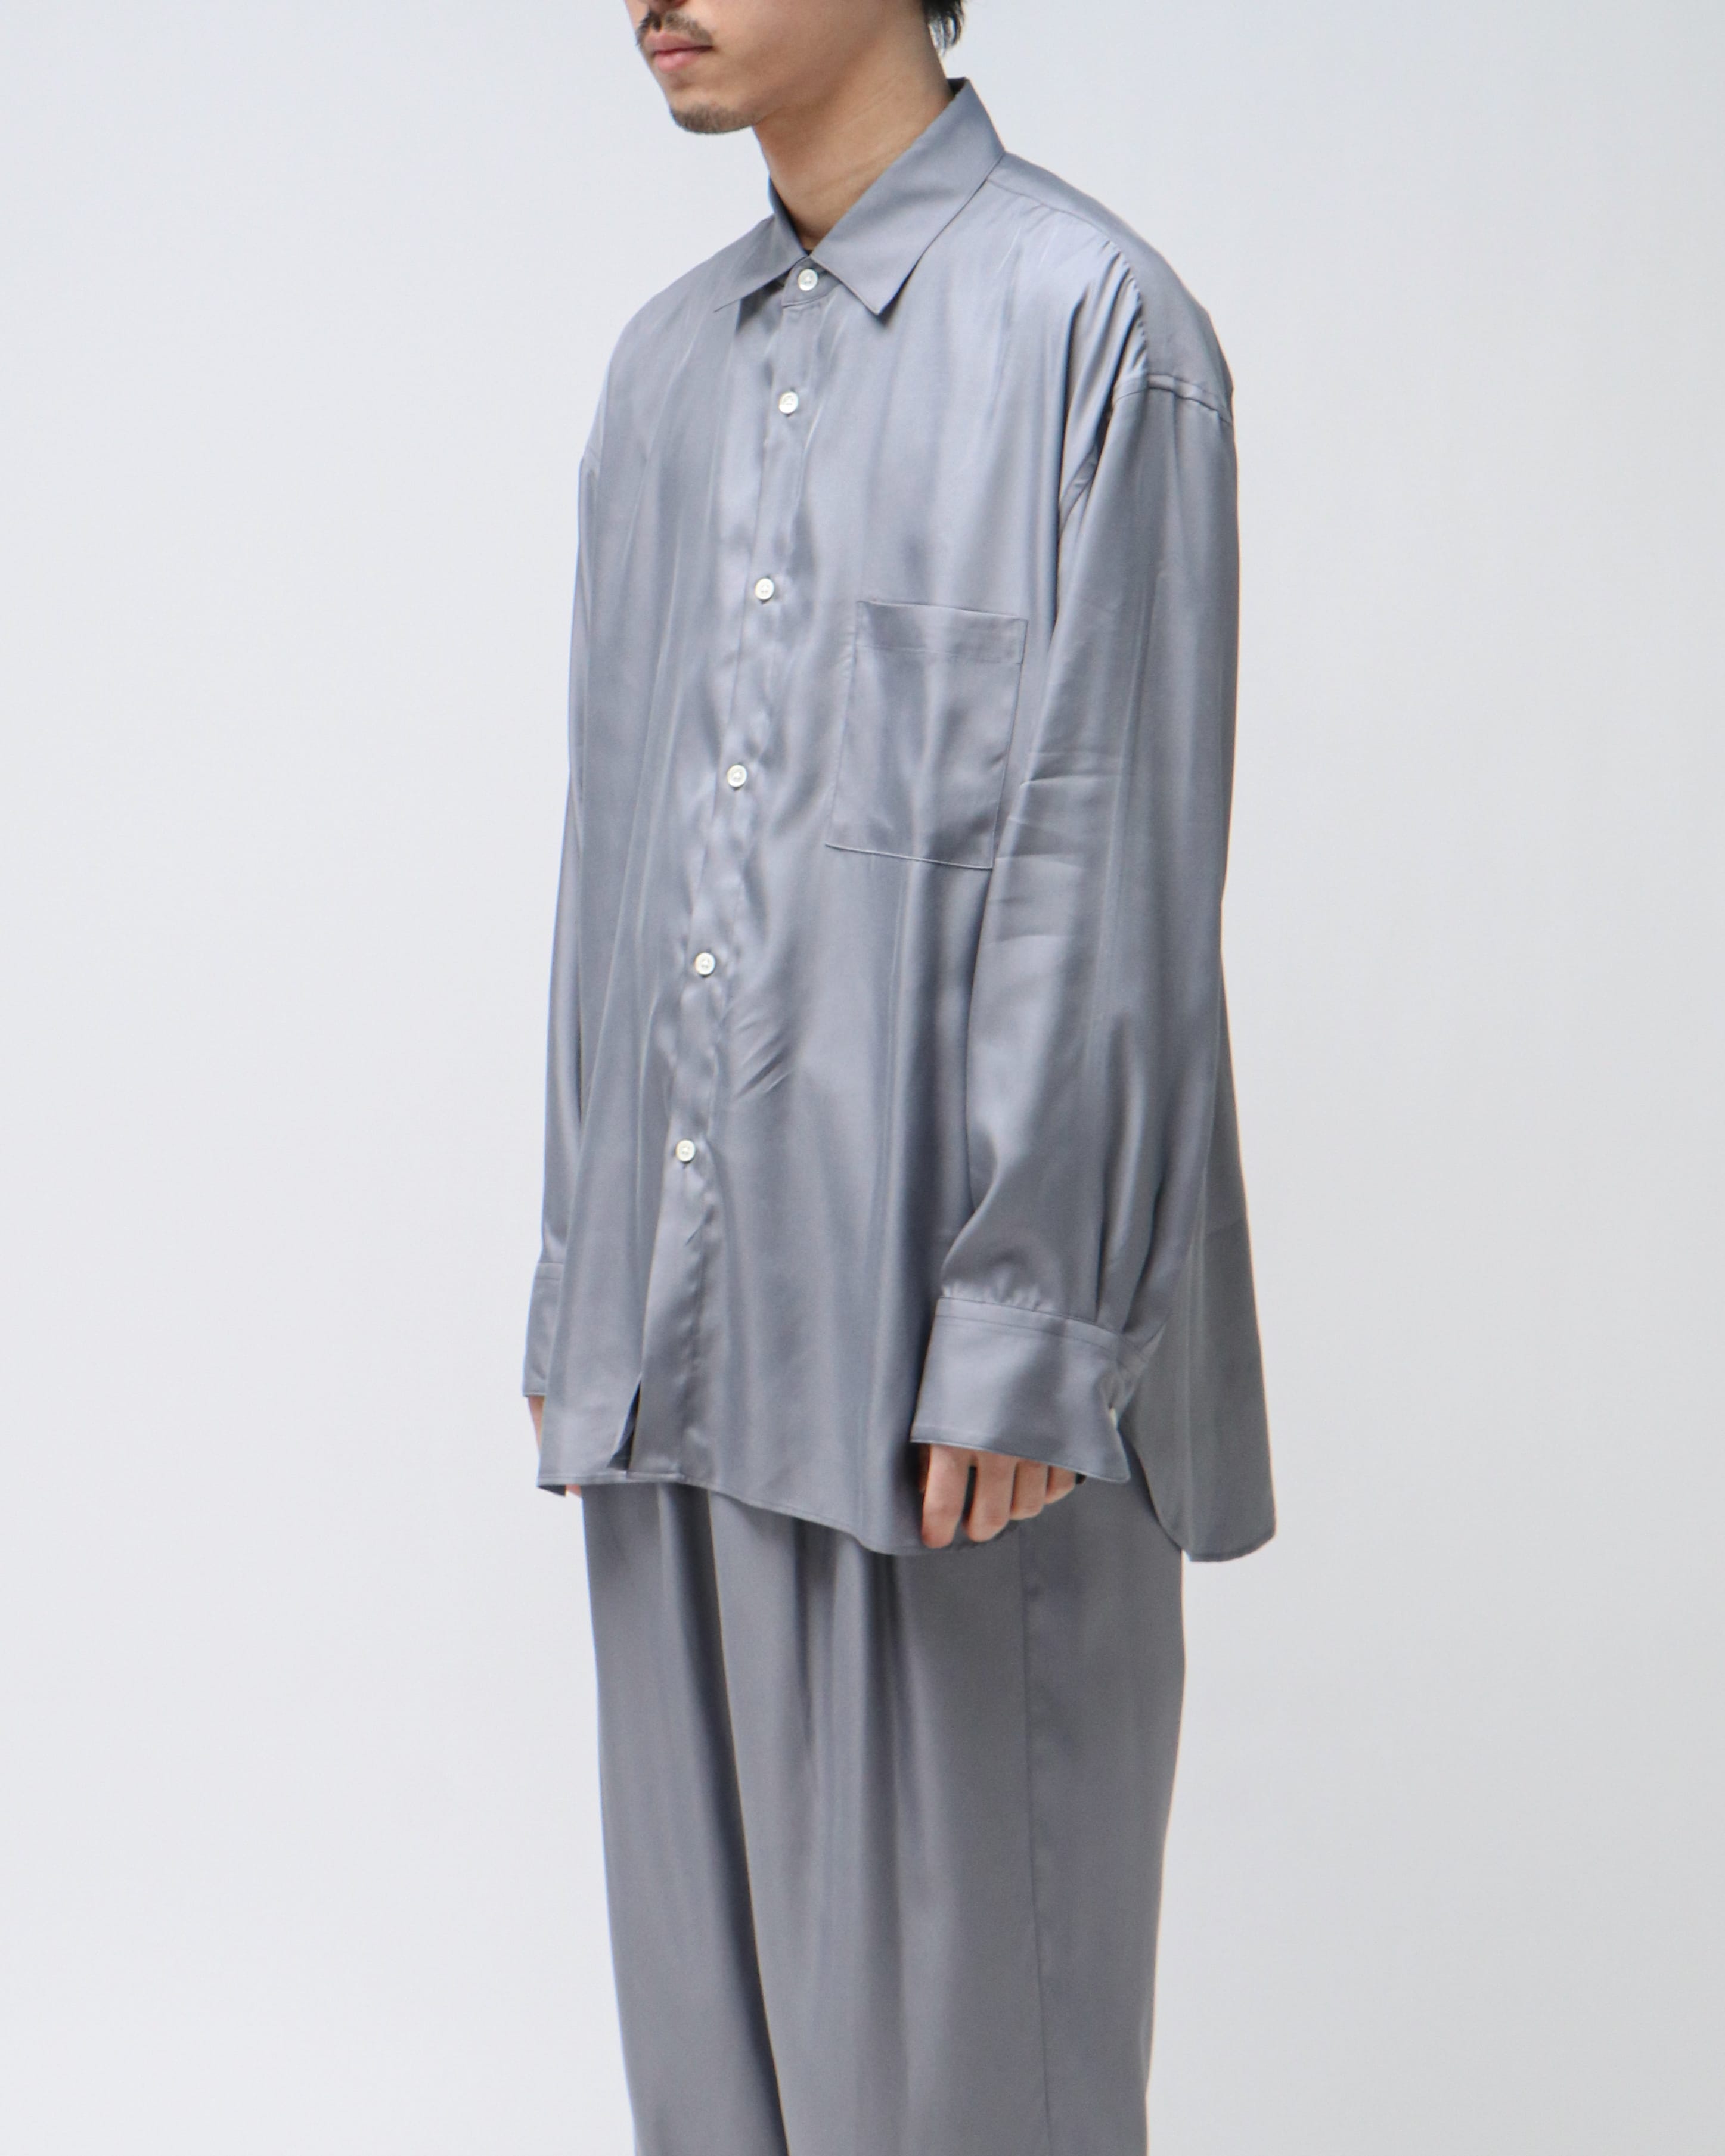 OVERSIZED CUPRO LS SHIRT BLUE GREY – TIME AFTER TIME